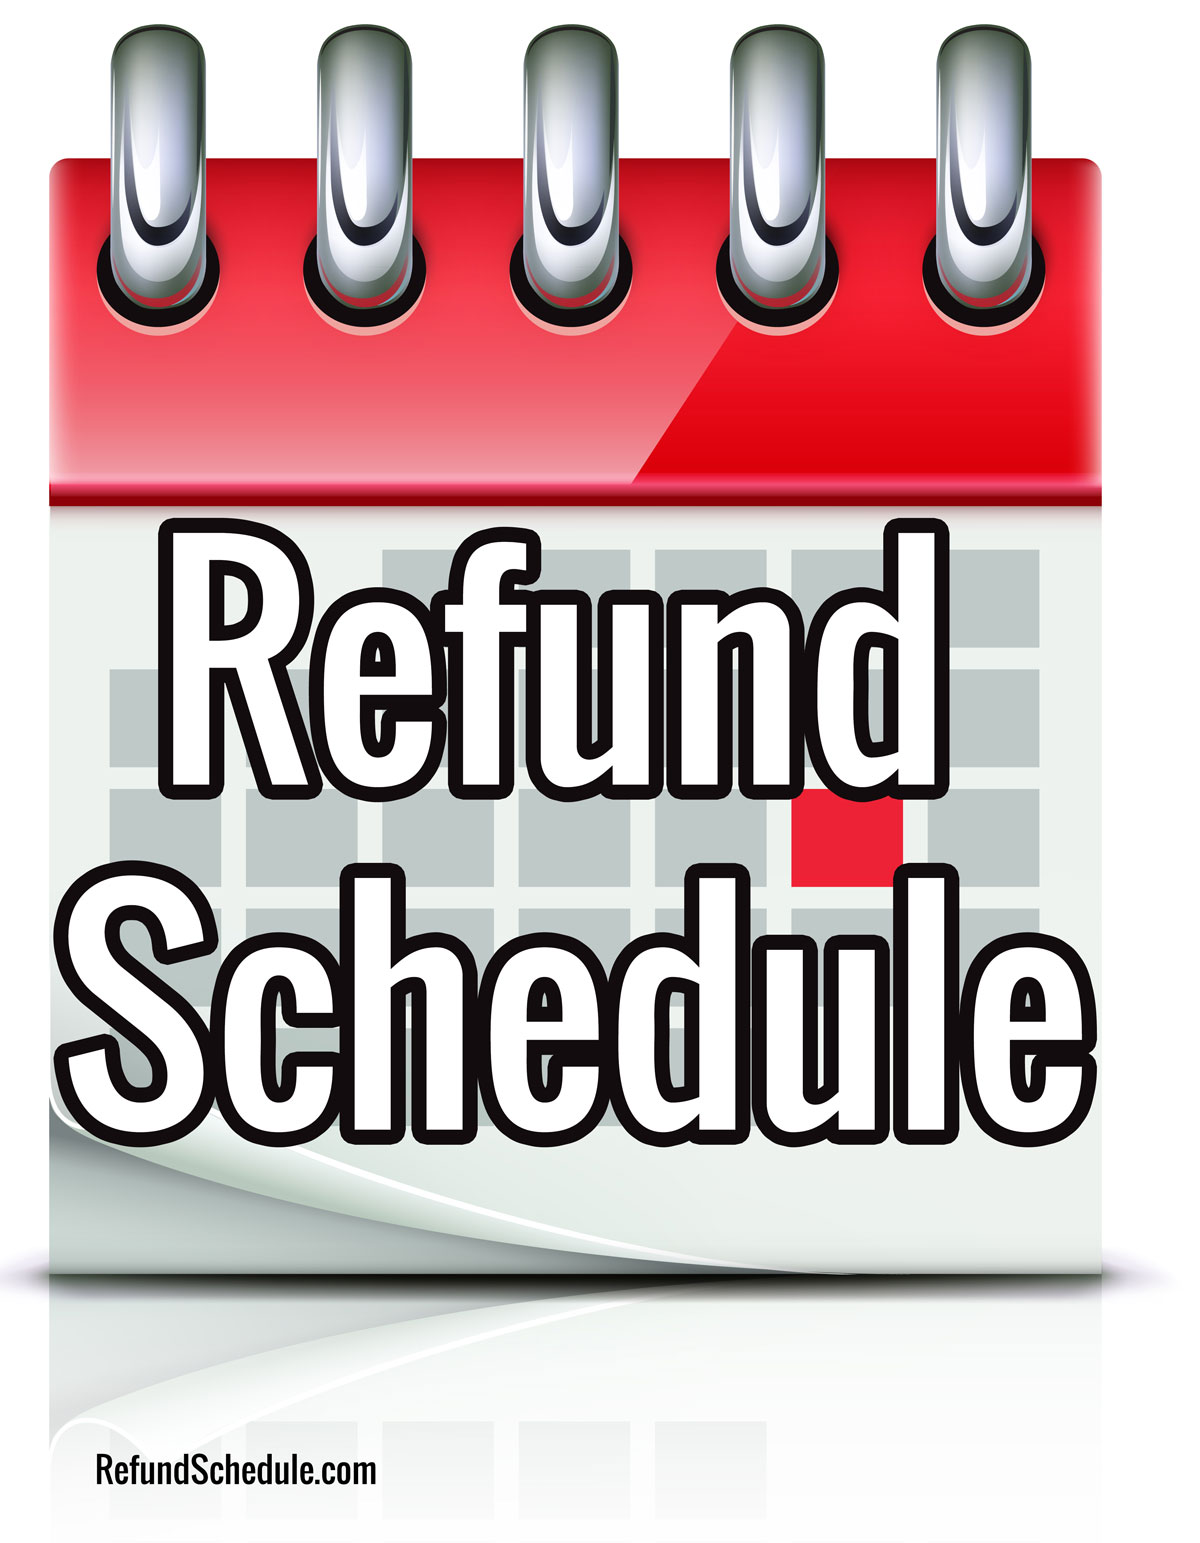 IRS Refund Schedule 2019 Refund Cycle Chart for 2018 E-File Tax Return1200 x 1543